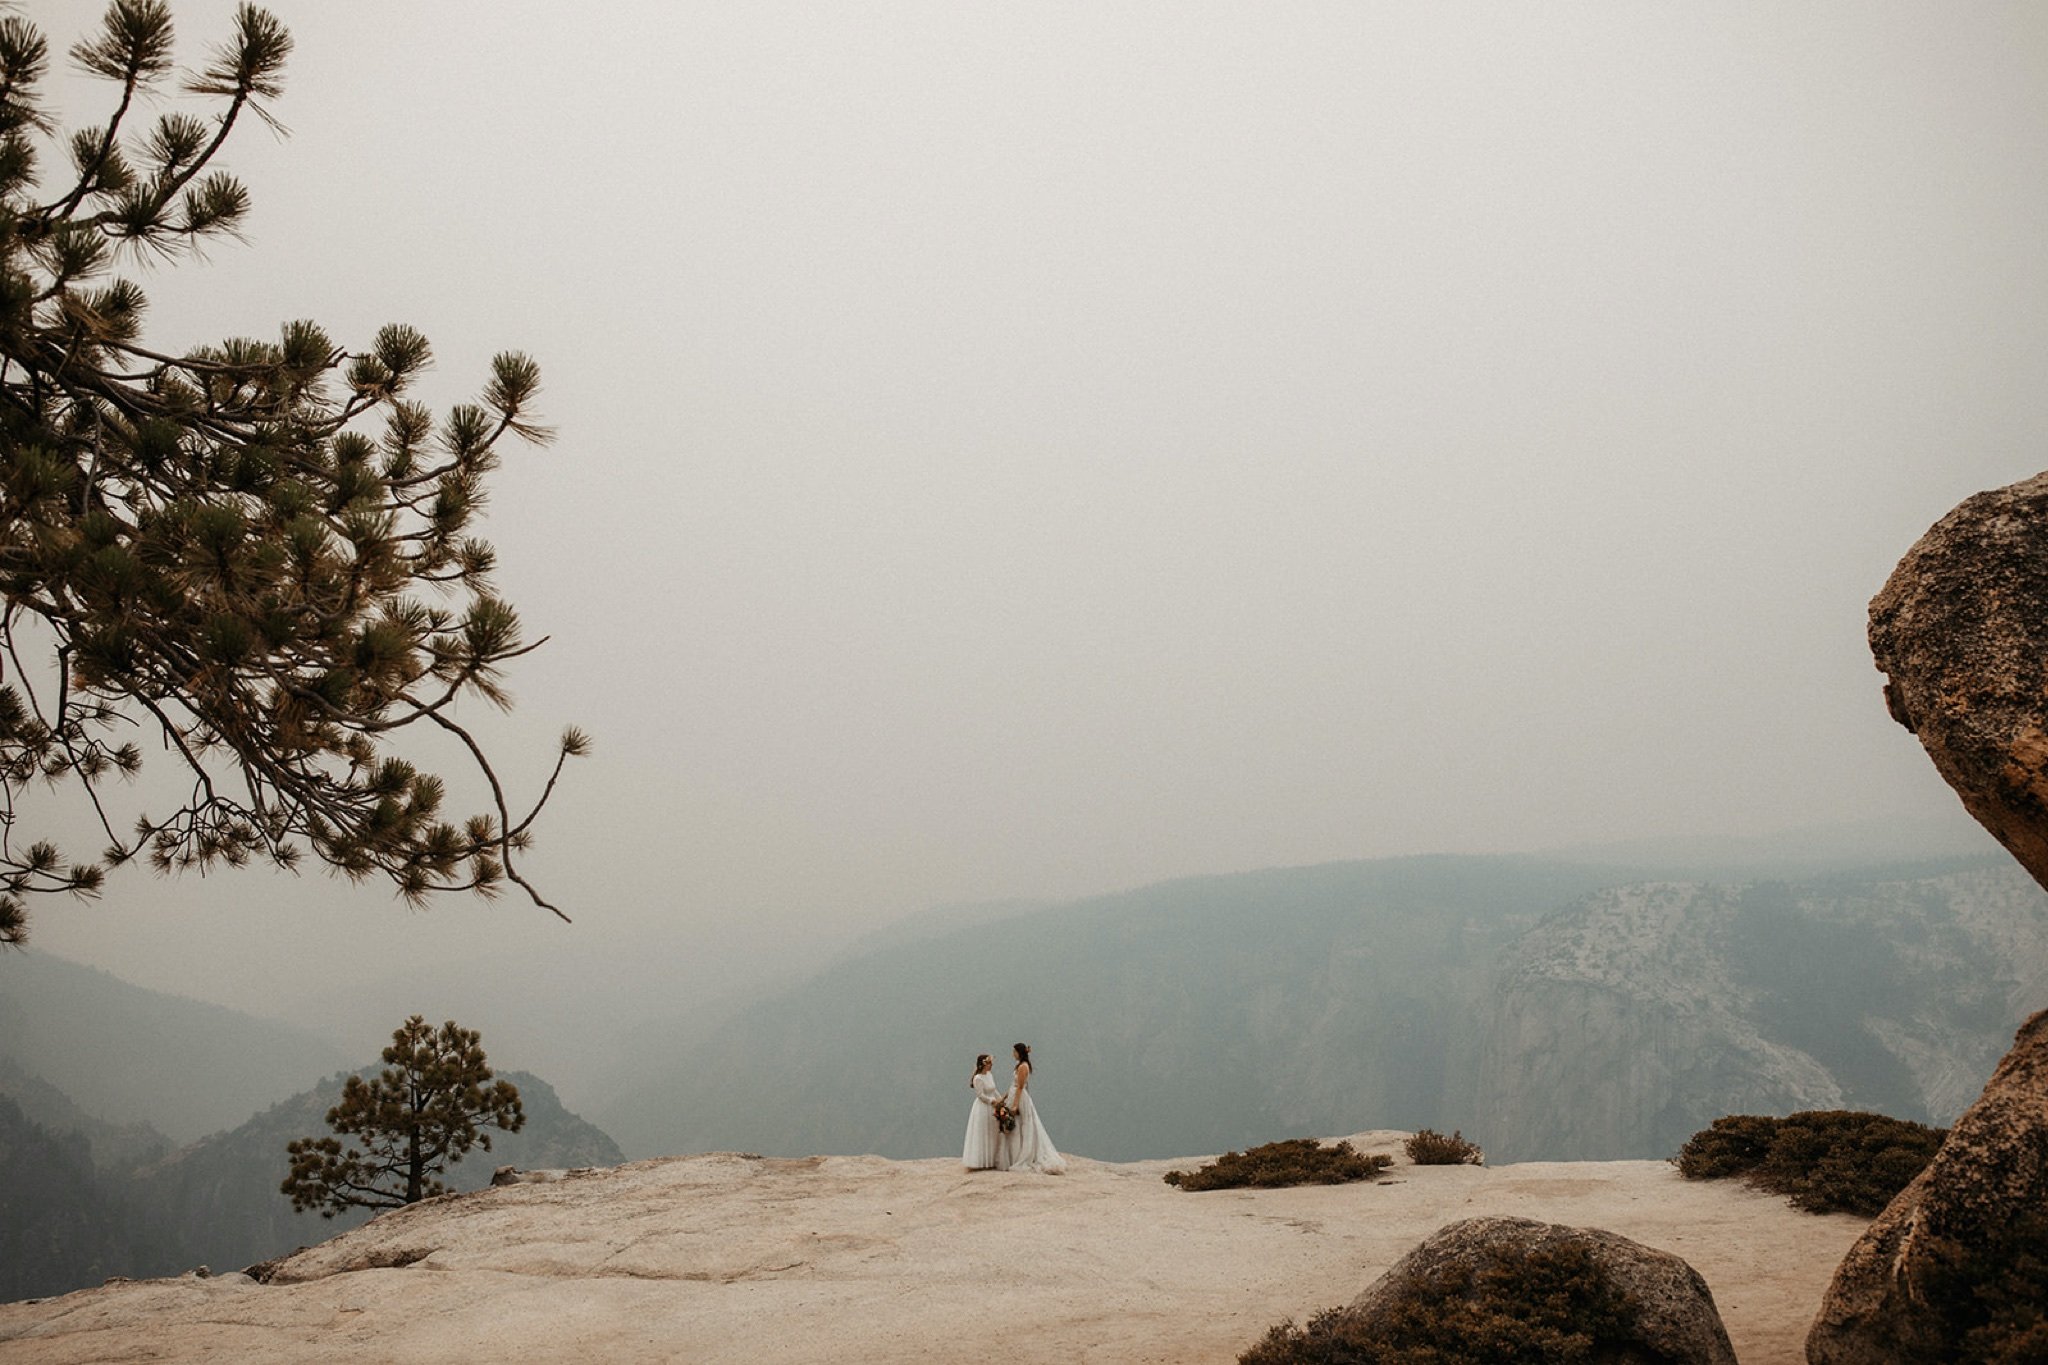 Yosemite National Park Elopement with Two Brides-Will Khoury34.jpg